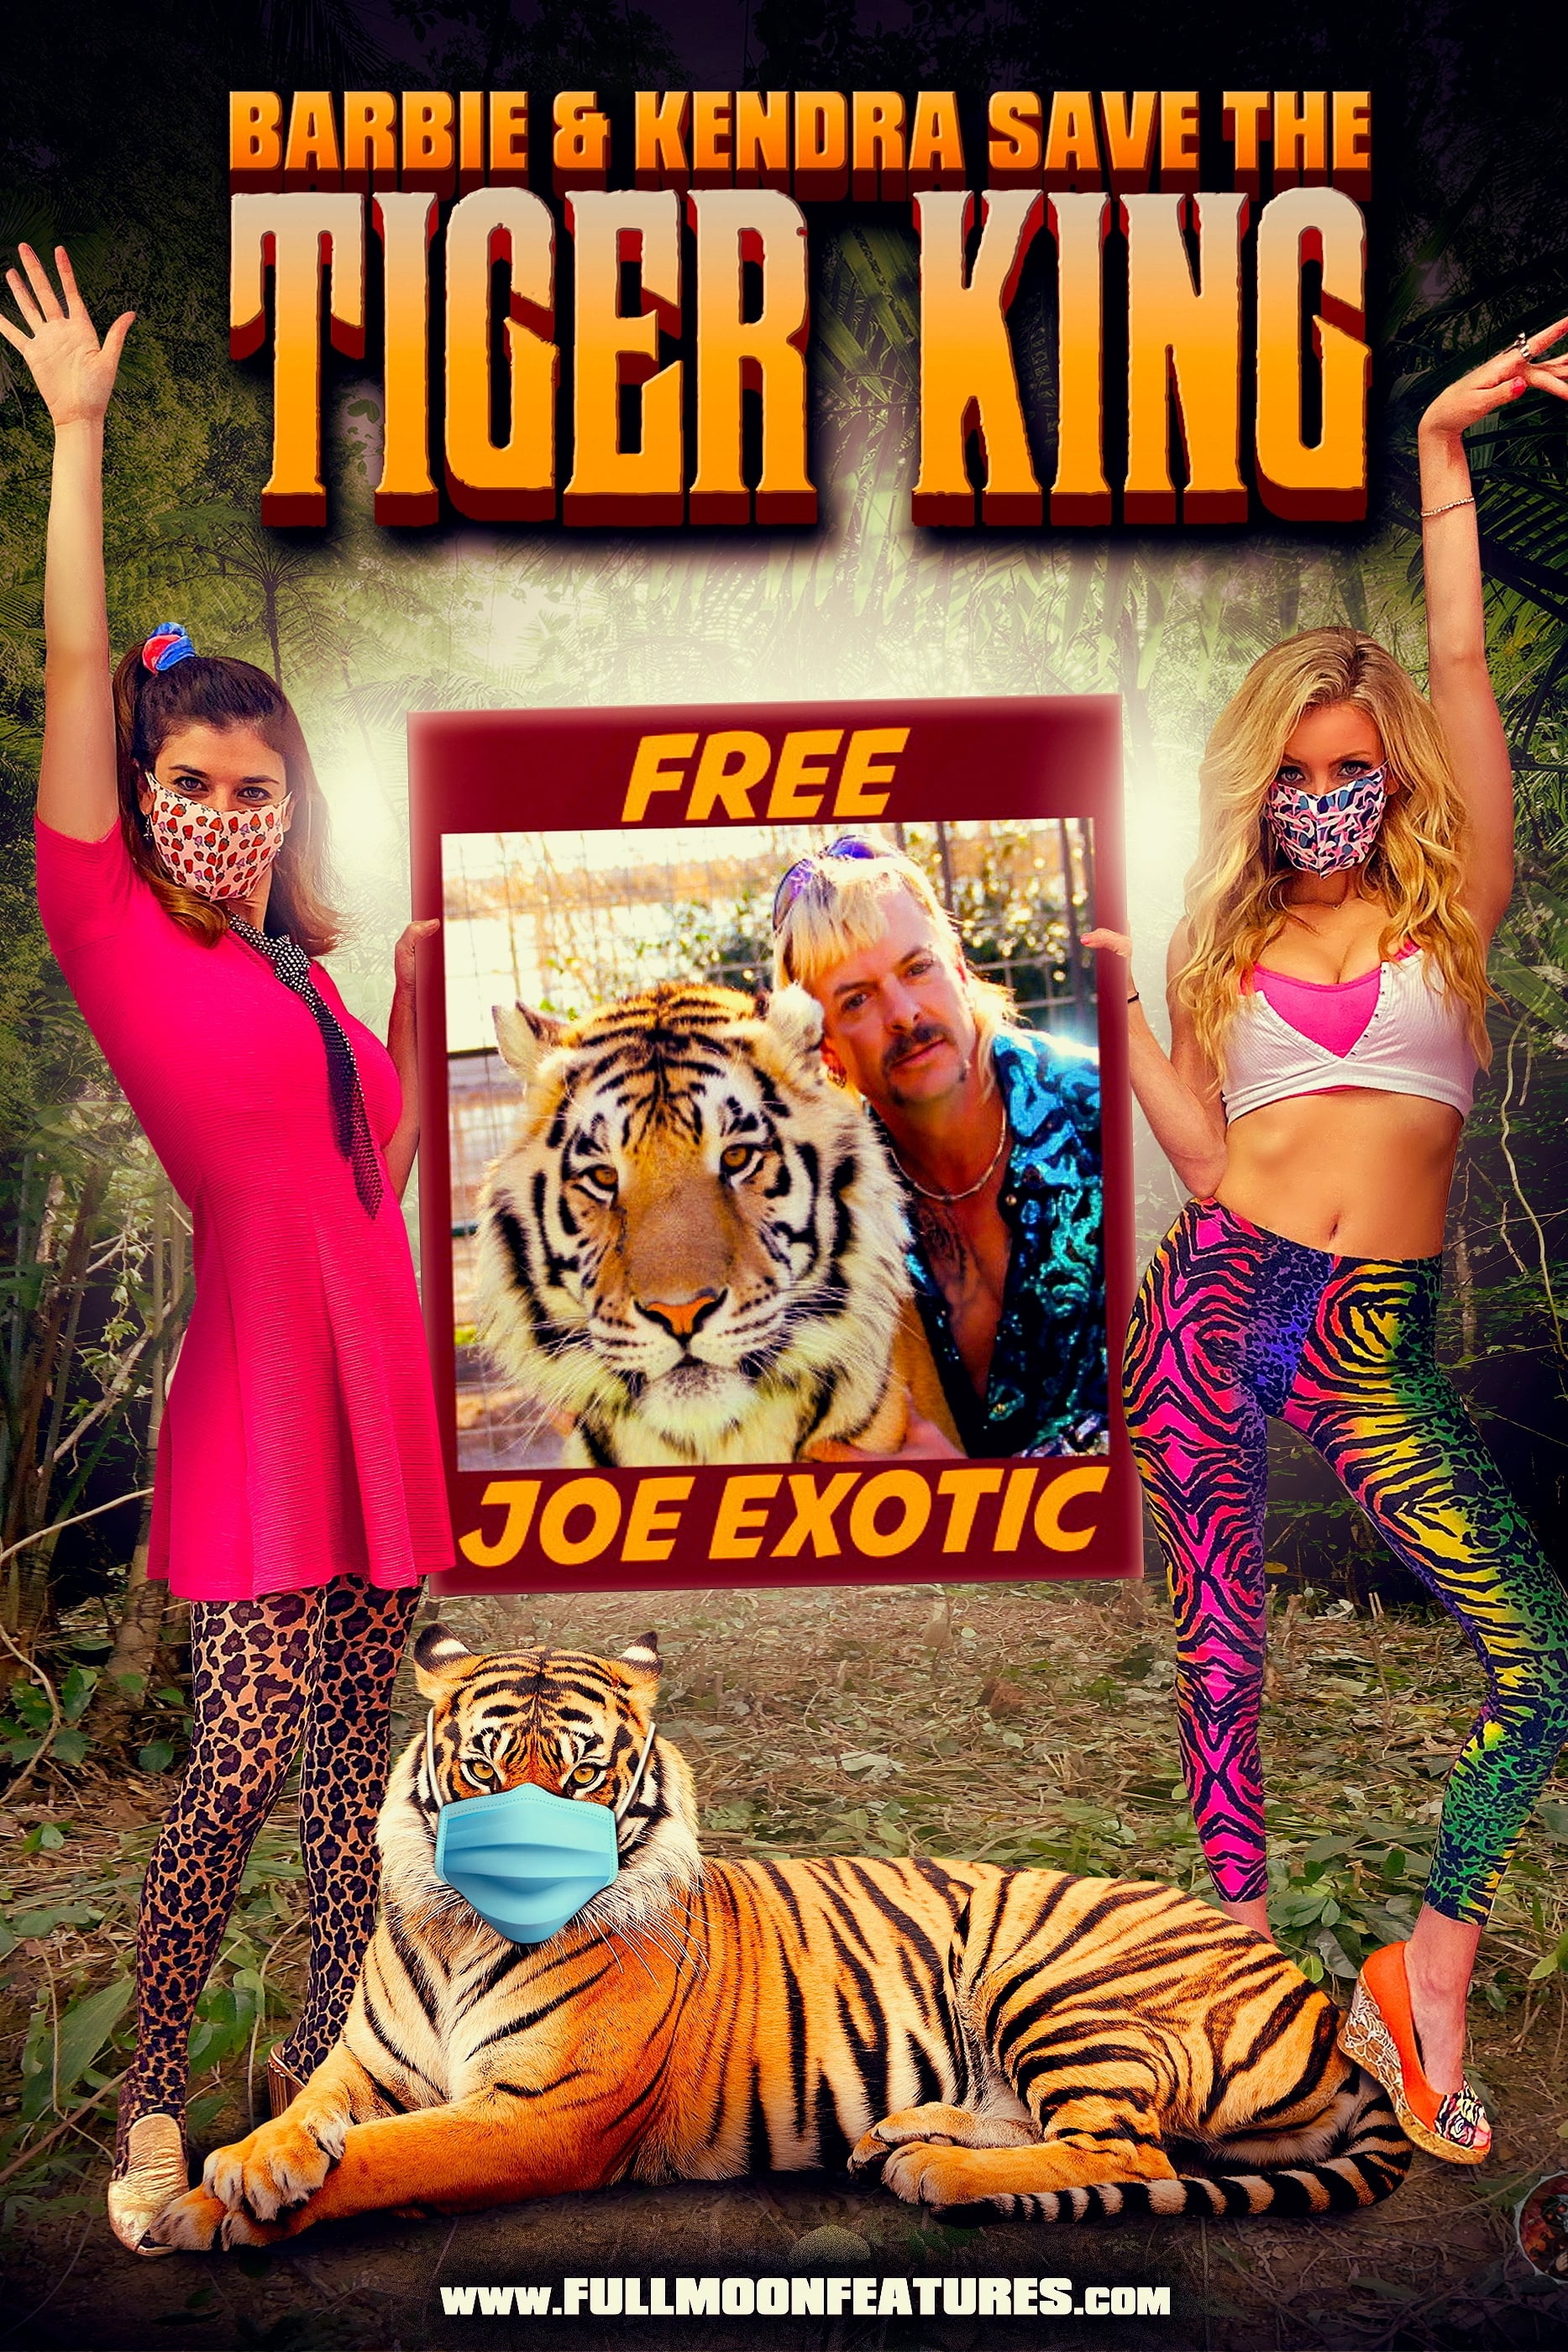 Barbie & Kendra Save the Tiger King (2020)